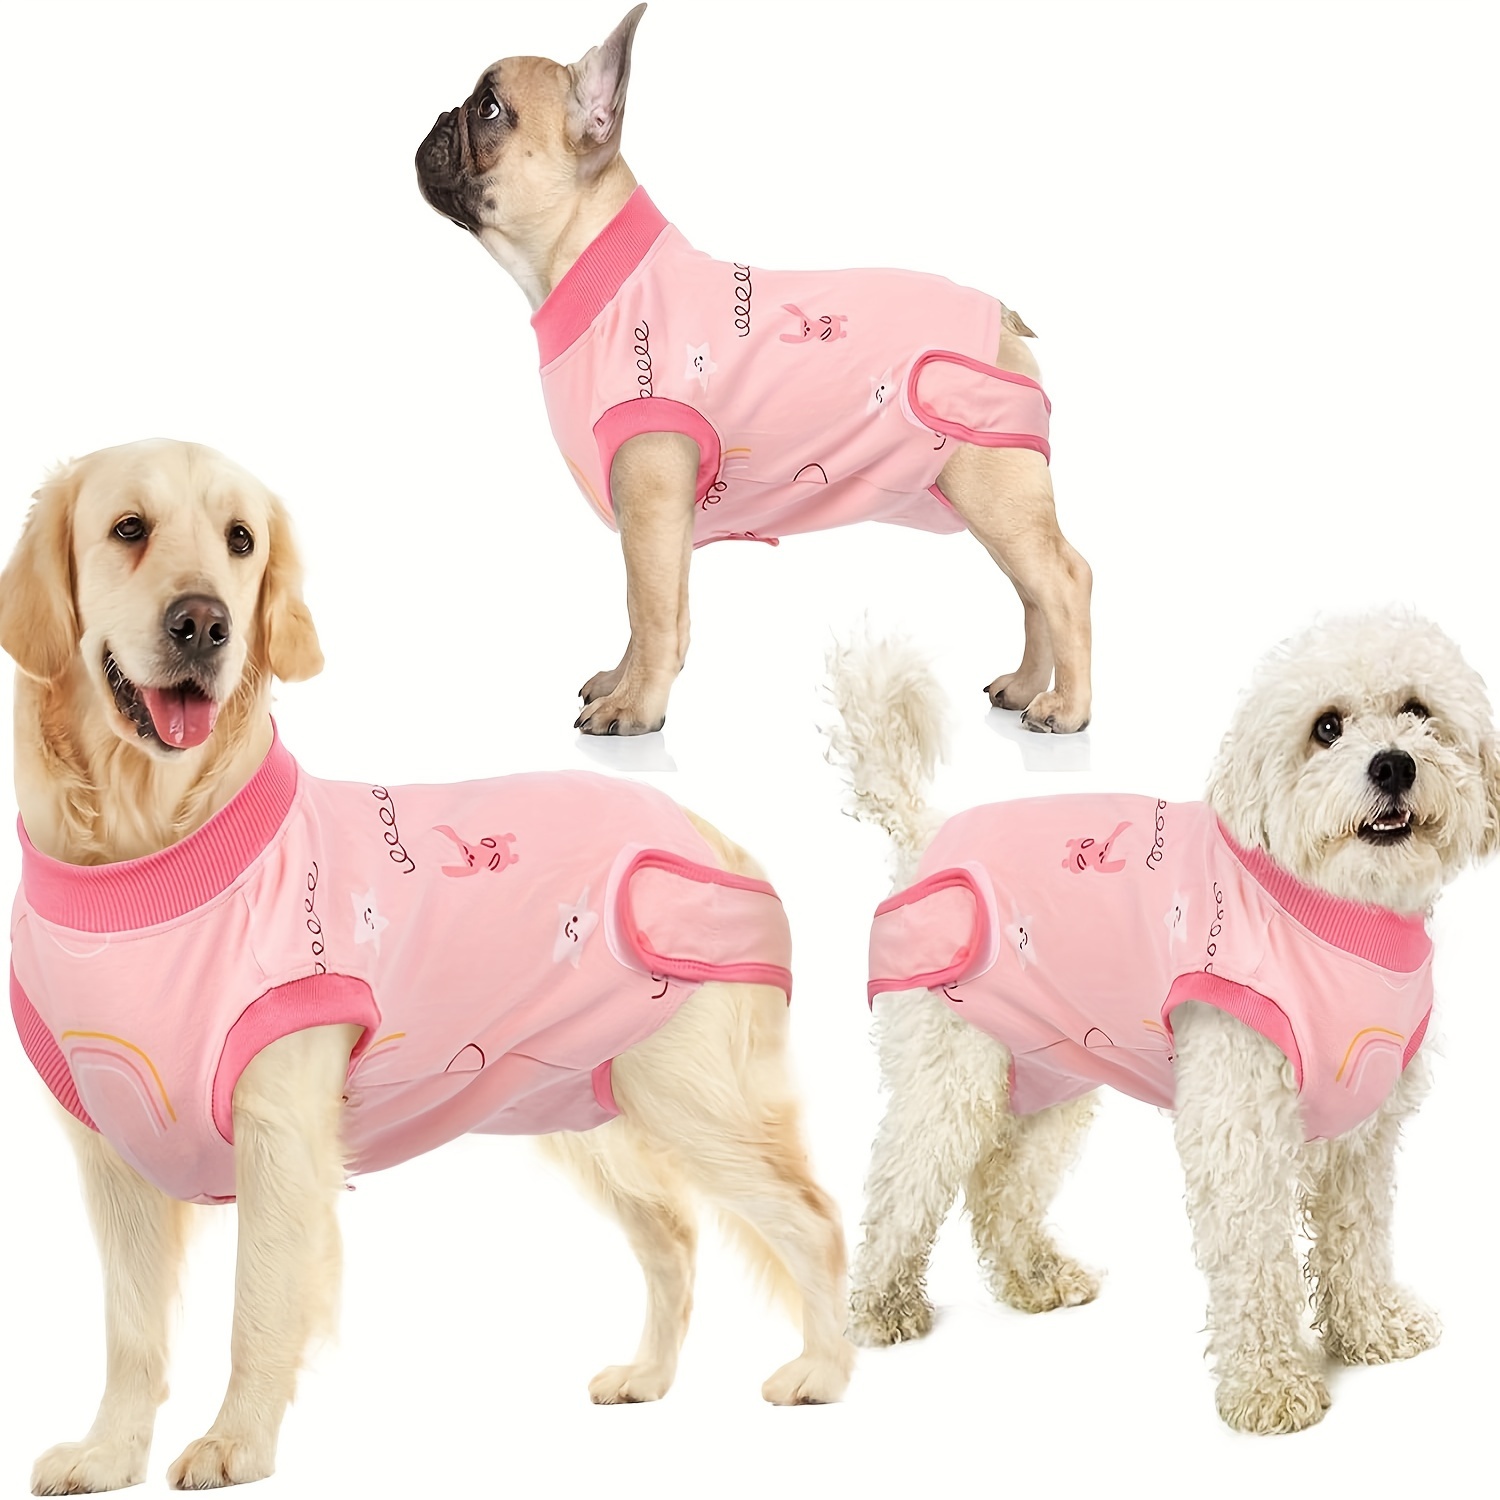 

Dog Recovery Suit After Surgery, Soft Dog Surgery Recovery Suit For Male Female Pet Dogs Cats, Dog Spay Neuter Onesie Snugly Shirt, Dog Cone Alternative Anti-licking Abdominal Wound